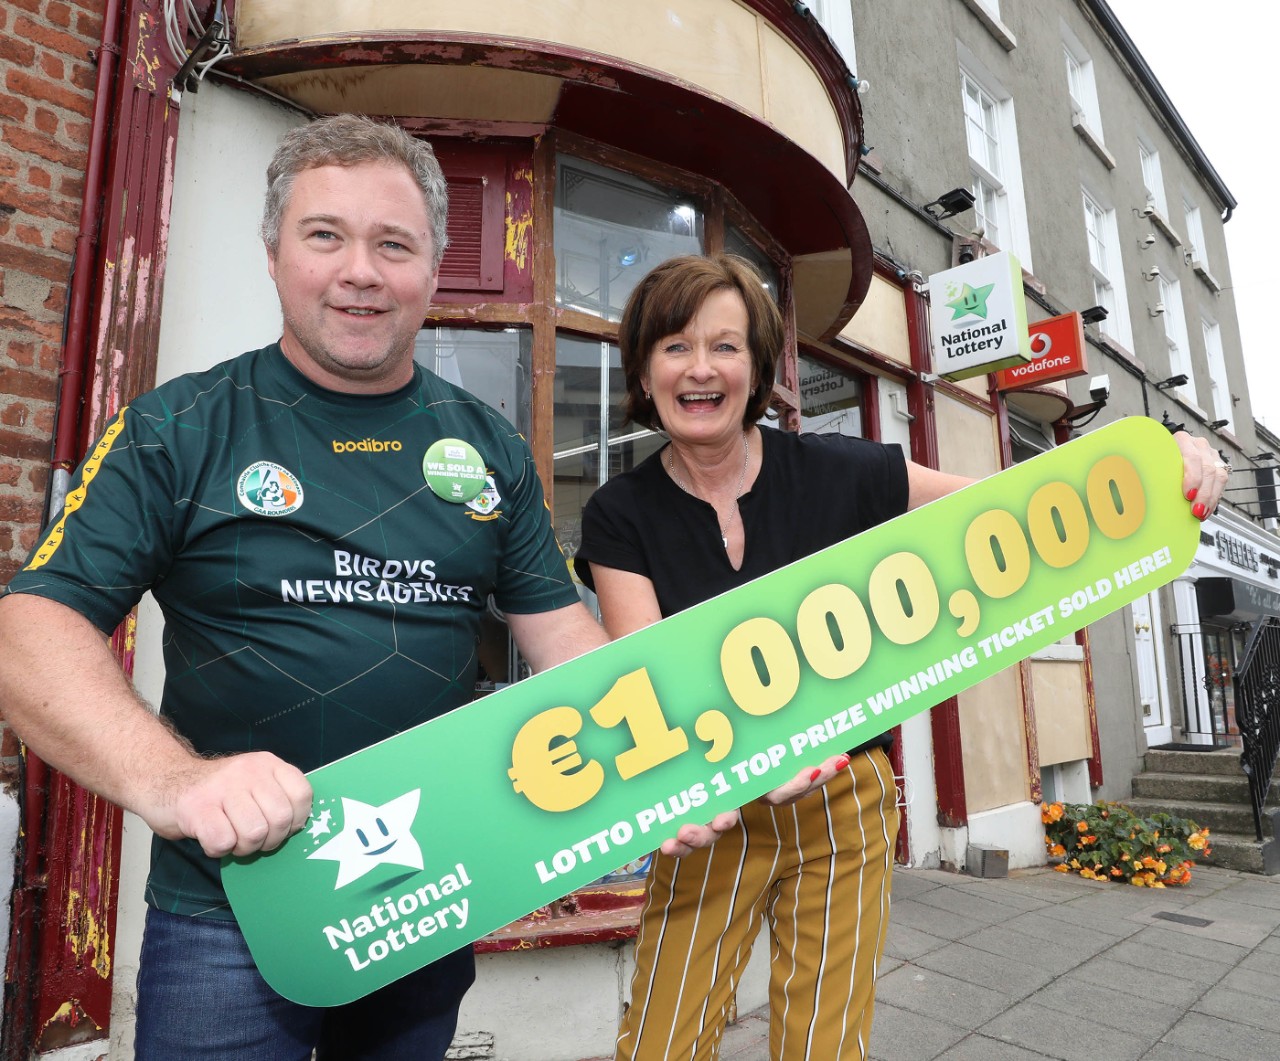 Carrickmacross Co Monaghan shop sell Lotto Plus 1 winning ticket 